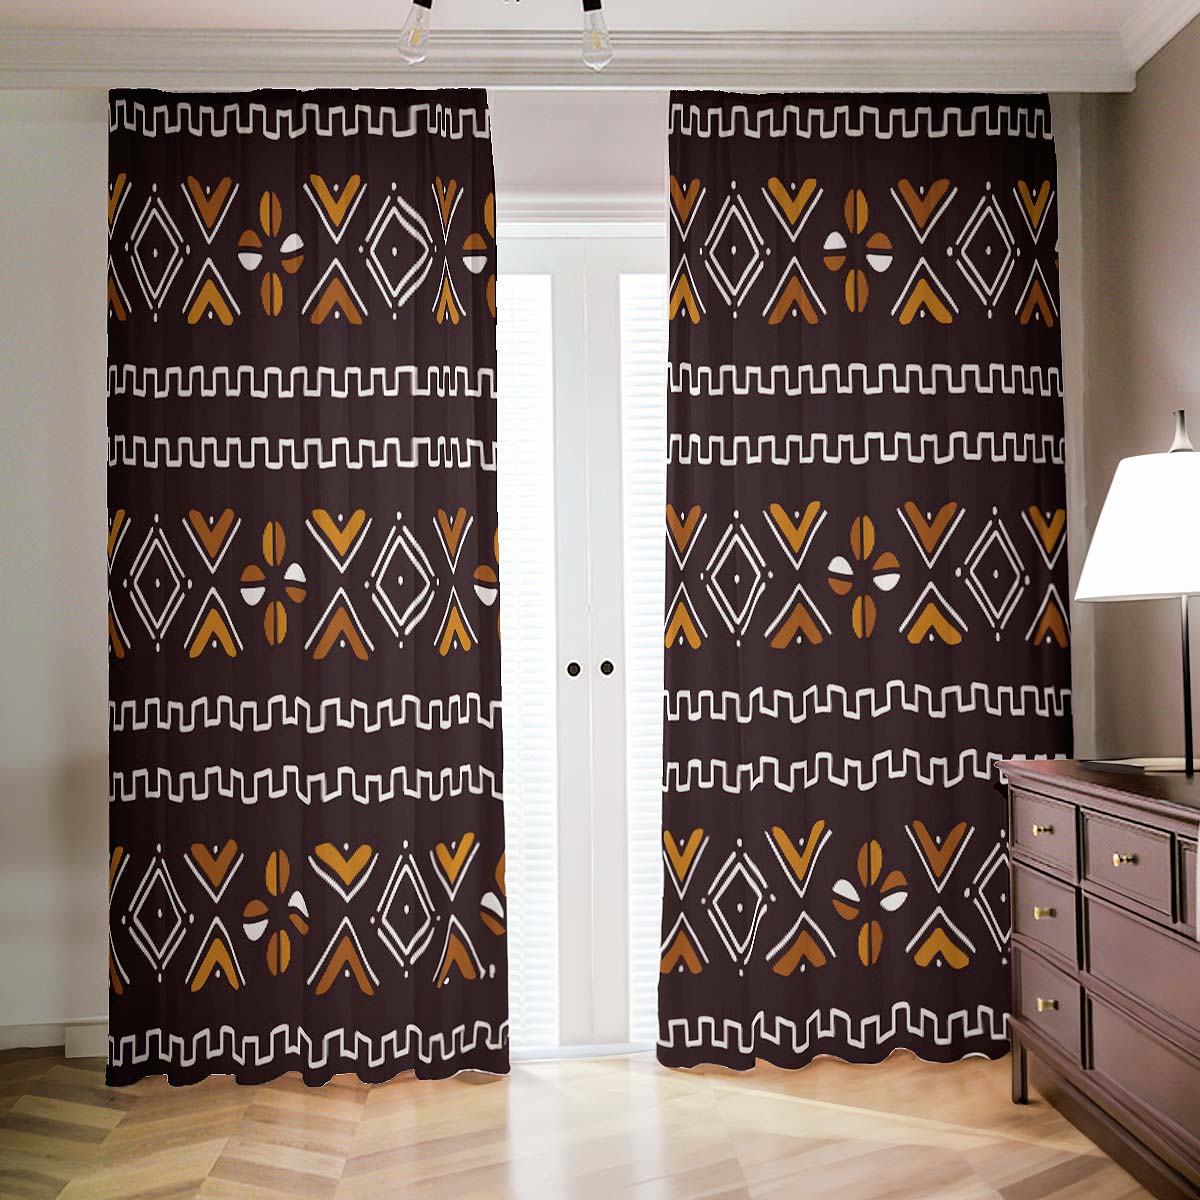 African Blackout Room Curtains Mudcloth Print (2-Piece Set)